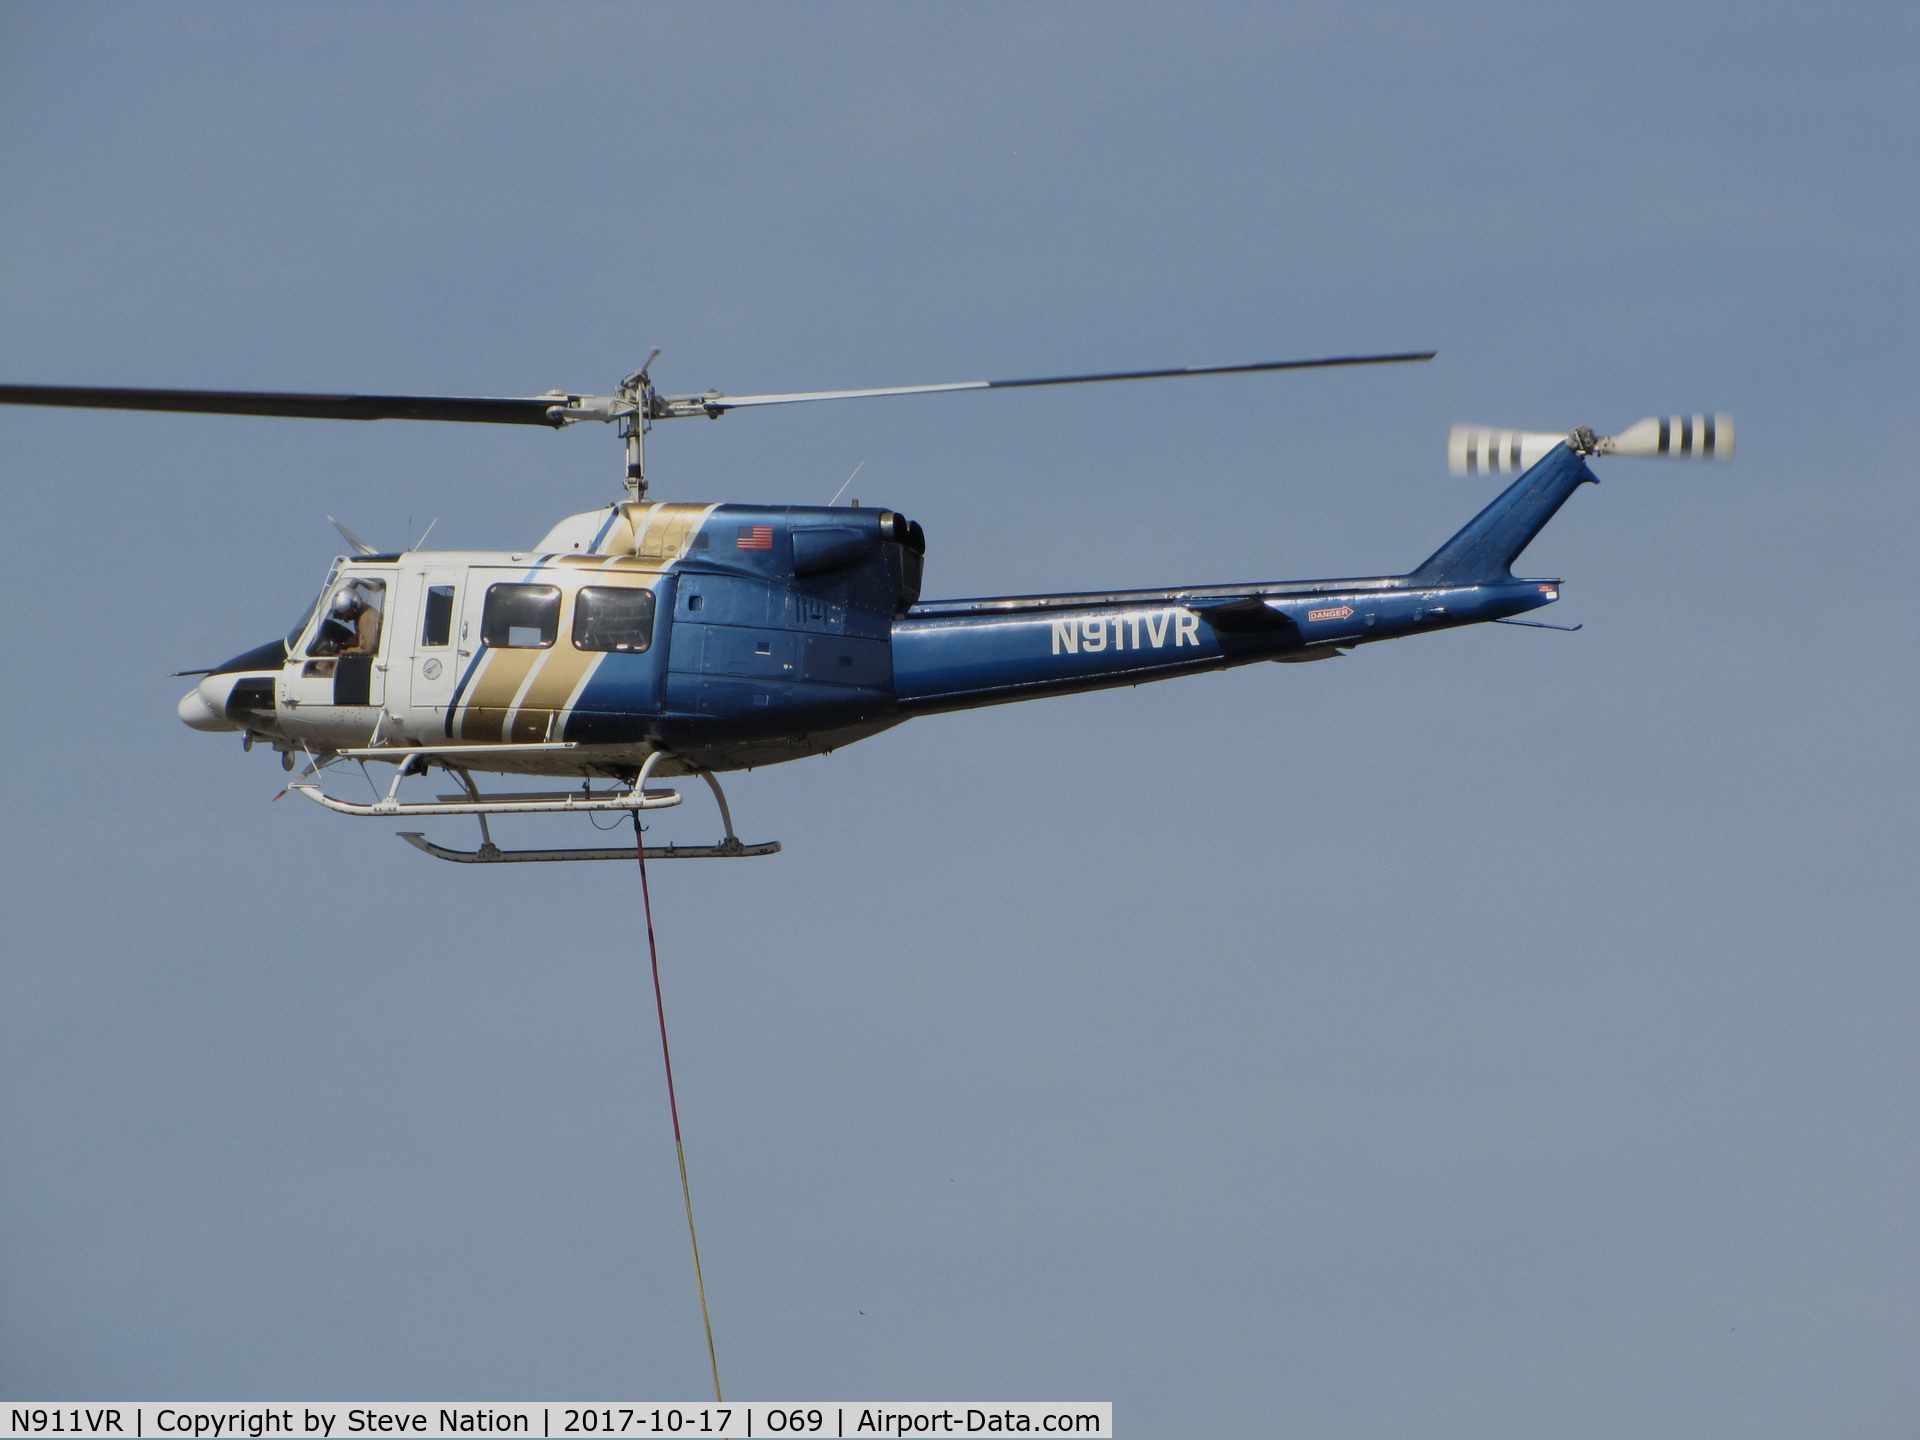 N911VR, 1980 Bell 212 C/N 30998, Rogers Helicopters (Fresno, CA) 1980 Bell 212 in hover at Petaluma Municipal Airport, CA temporary home base before leaving to make water drops on the devastating October 2017 Northern California wildfires